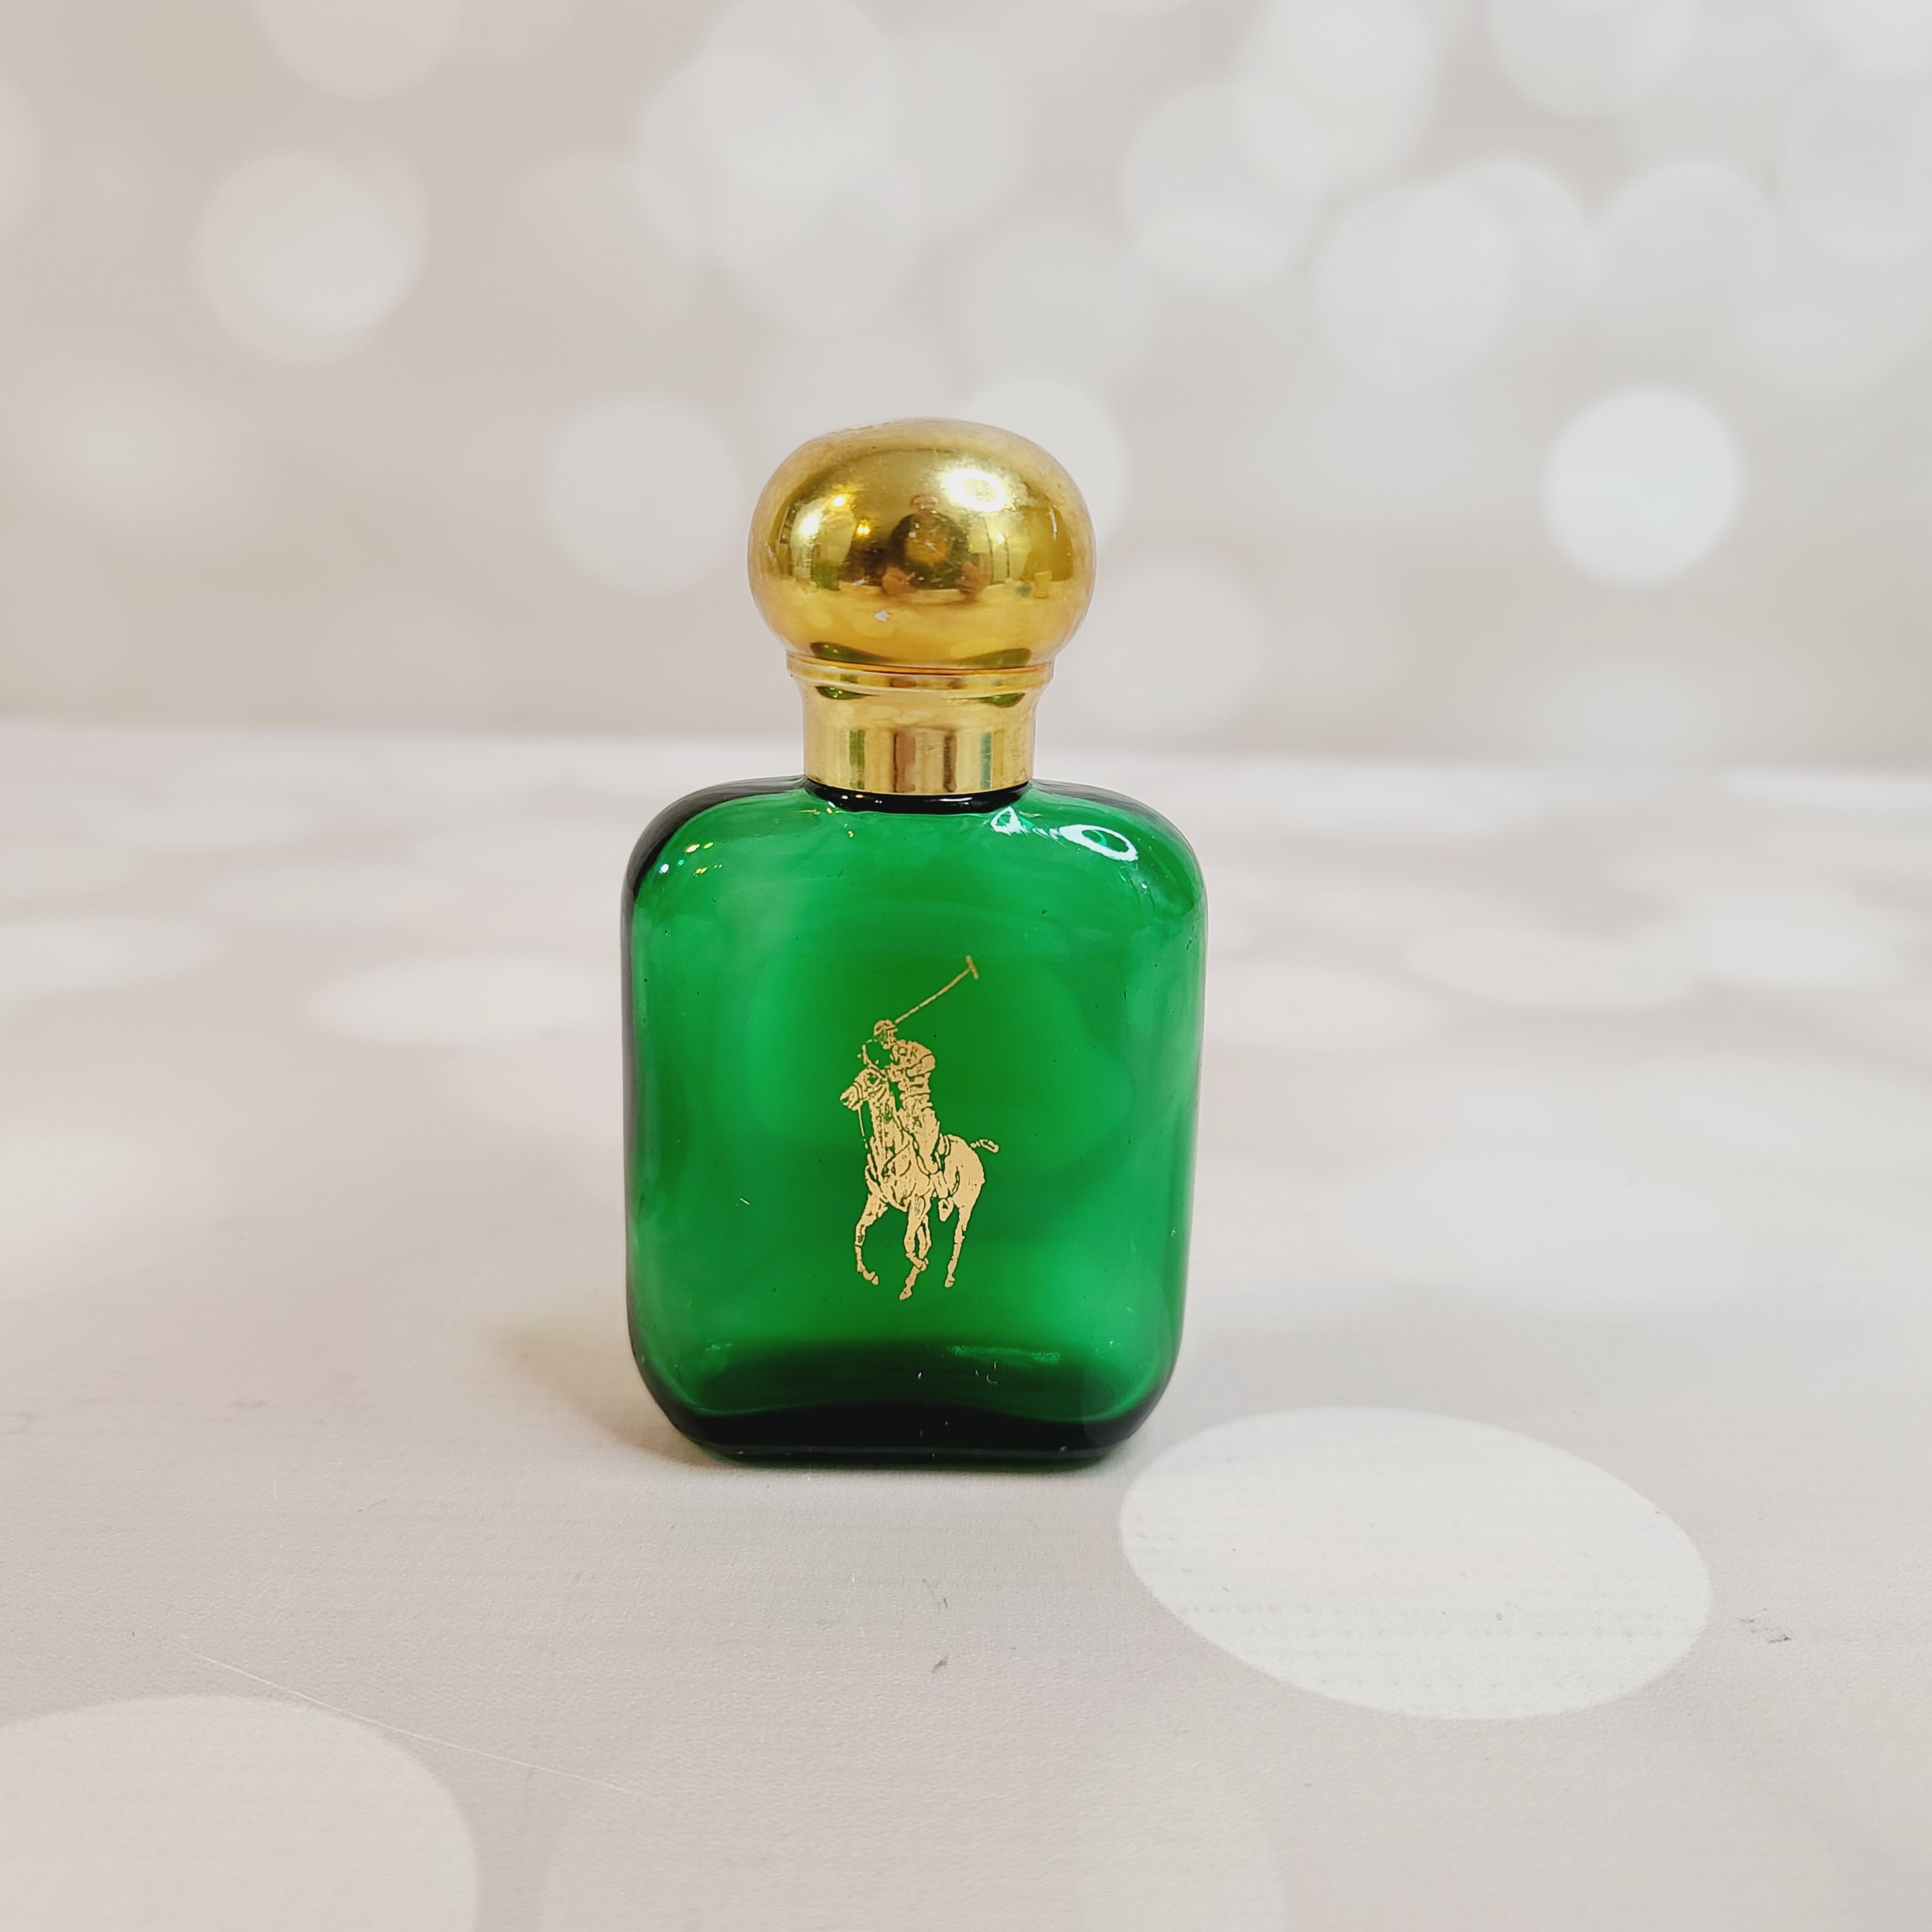 Vintage Perfumes, Lovely Choices, Ralph Lauren, Givenchy, Royal